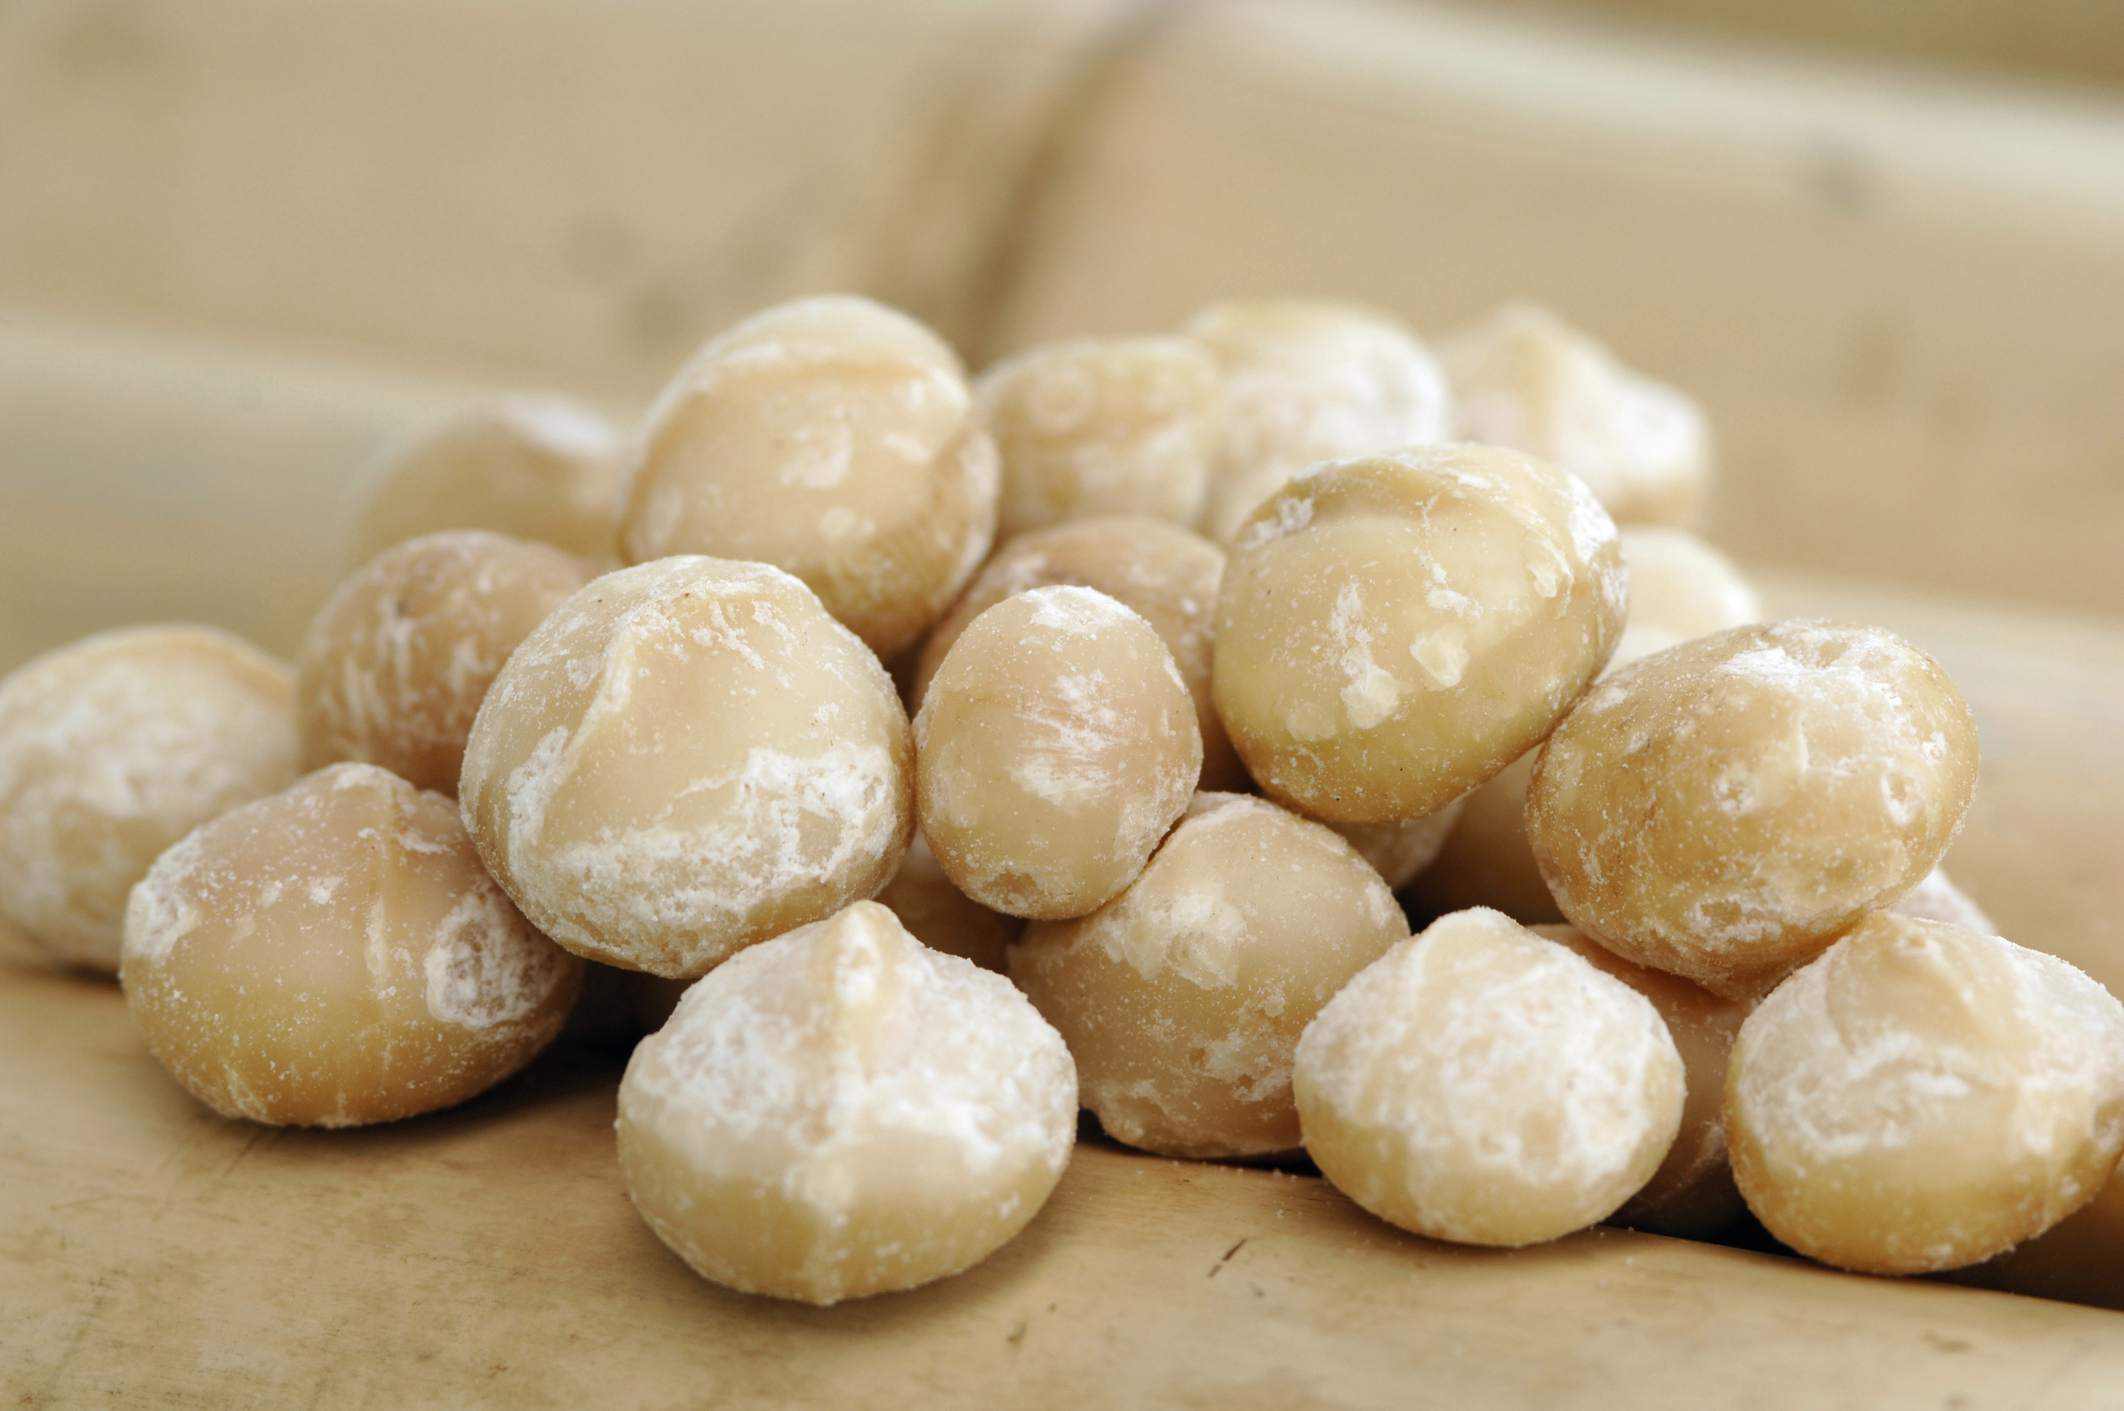 A pile of macadamia nuts.